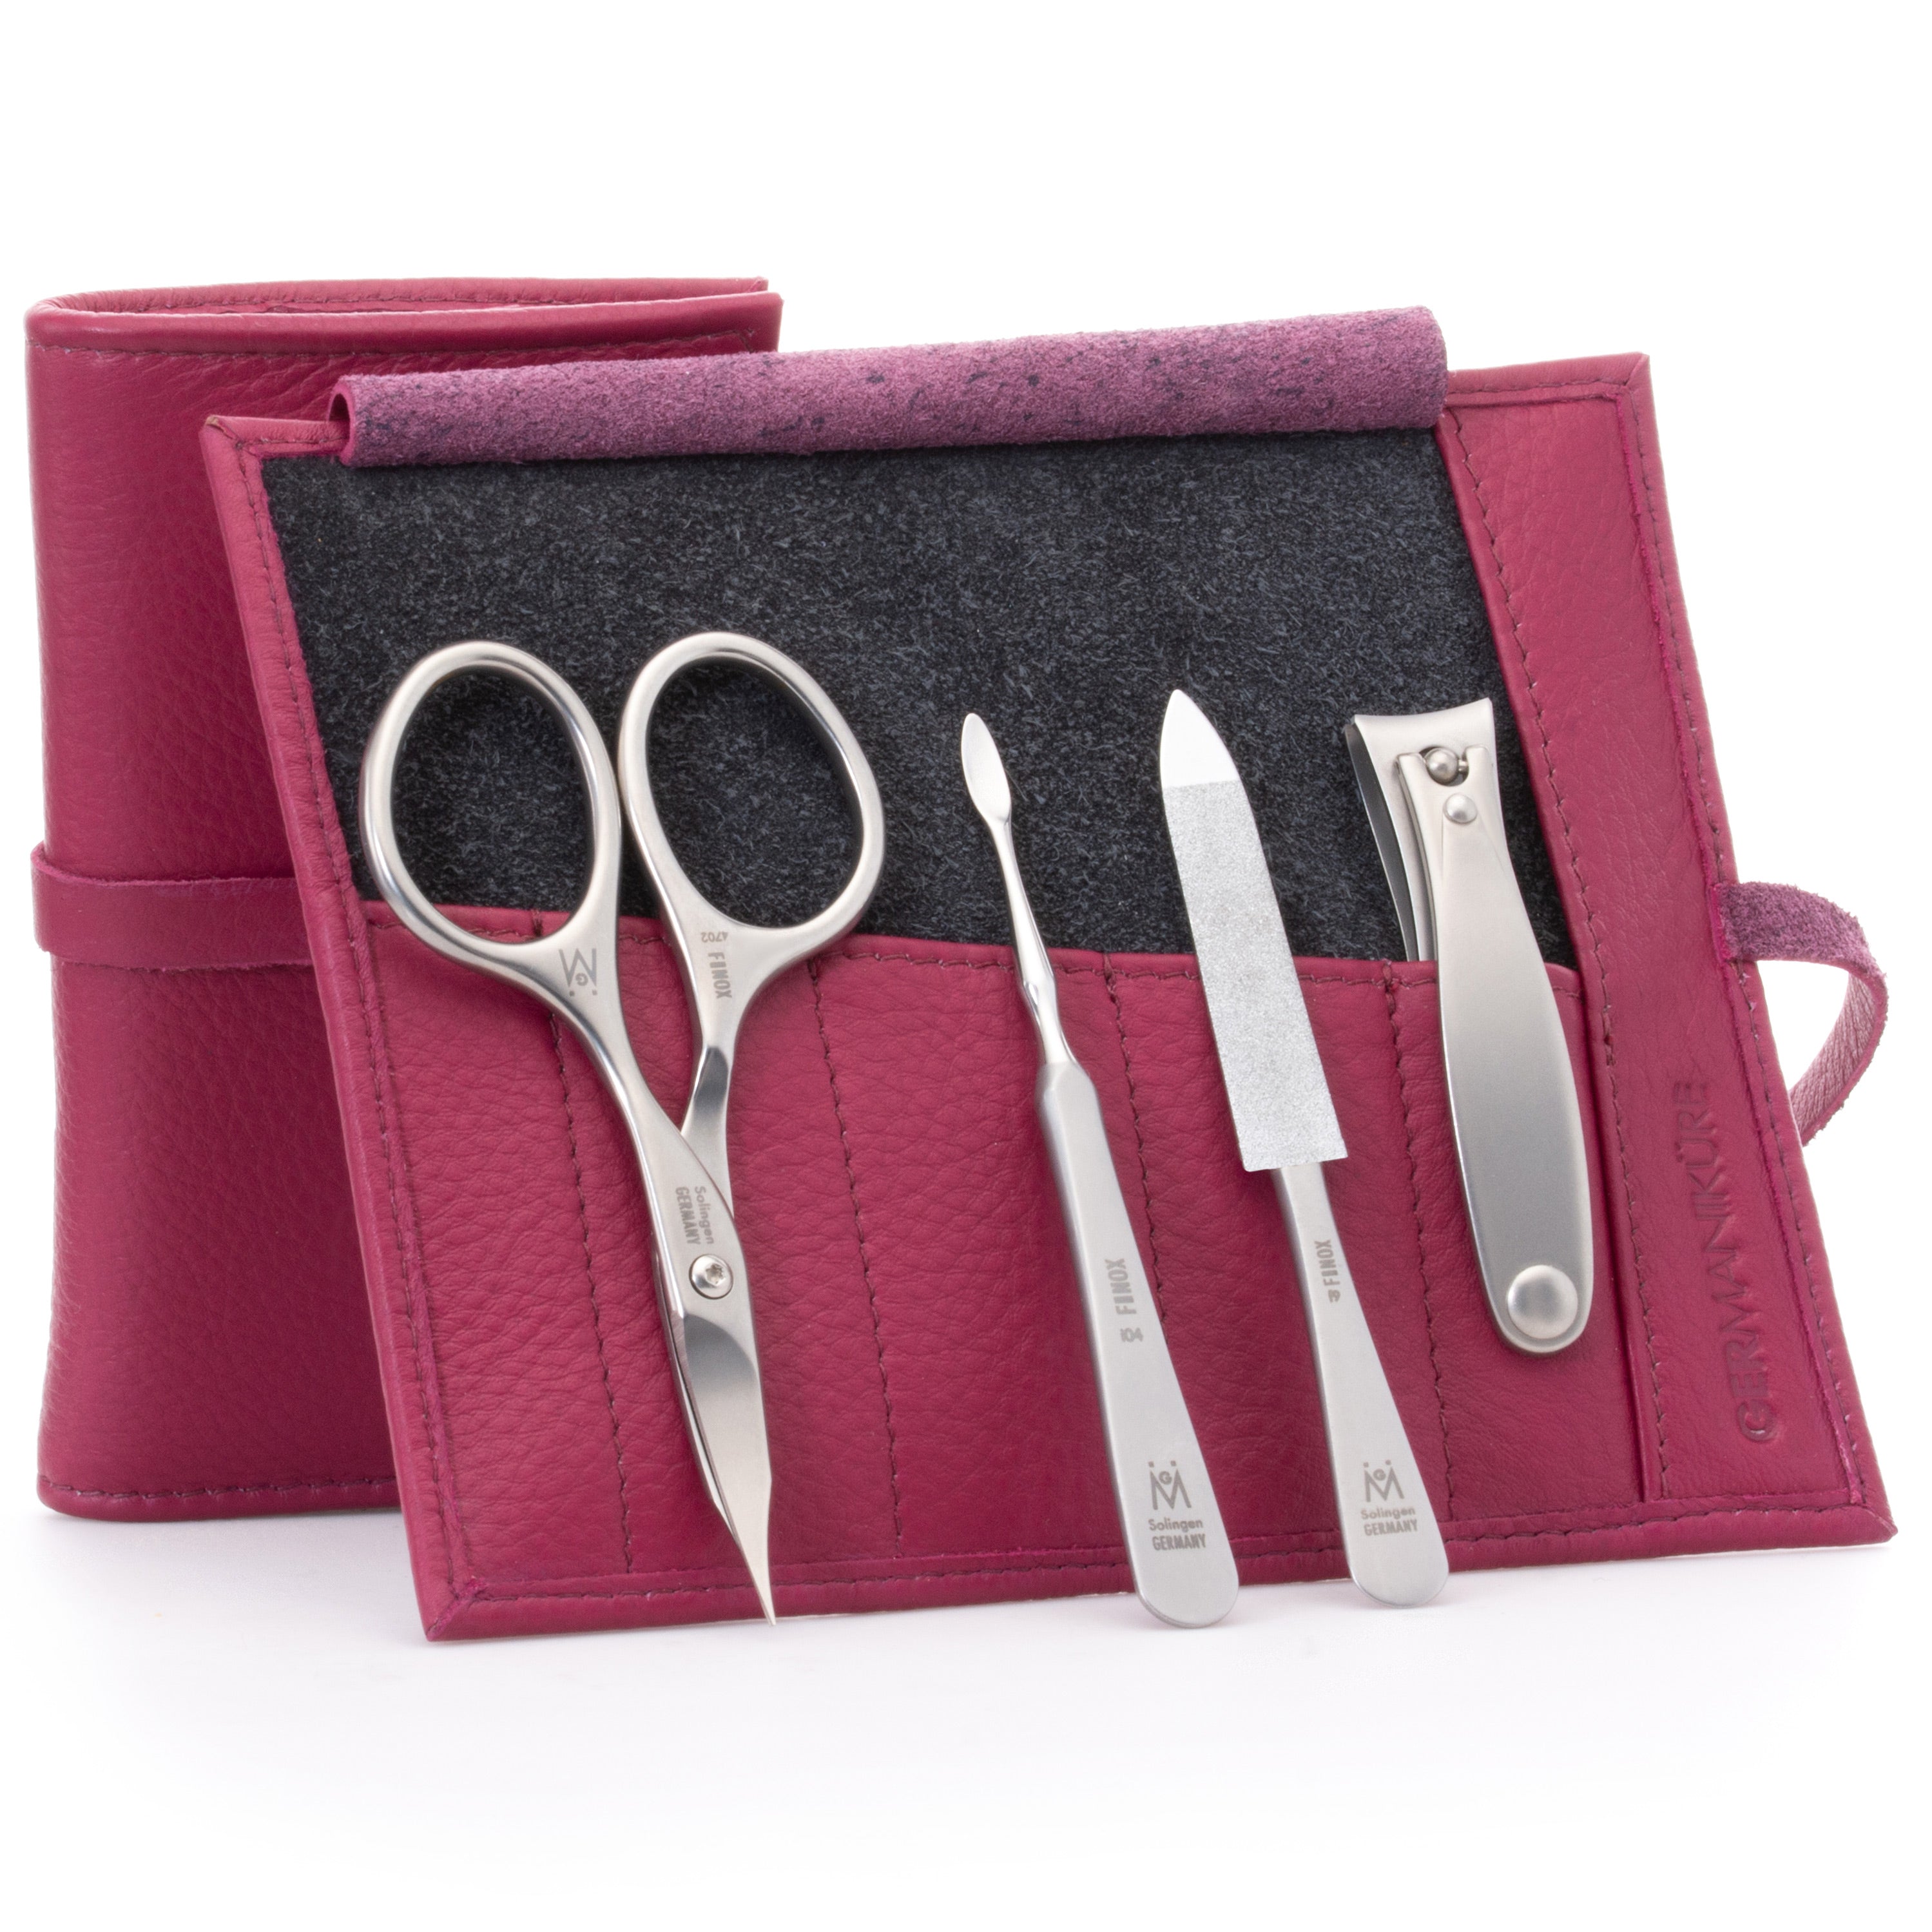 Germanikure 4pc Manicure Set - Handmade in Solingen Germany, Finox High Carbon Stainless Steel: Nail Clippers, Self Sharpening Combination Scissors, C